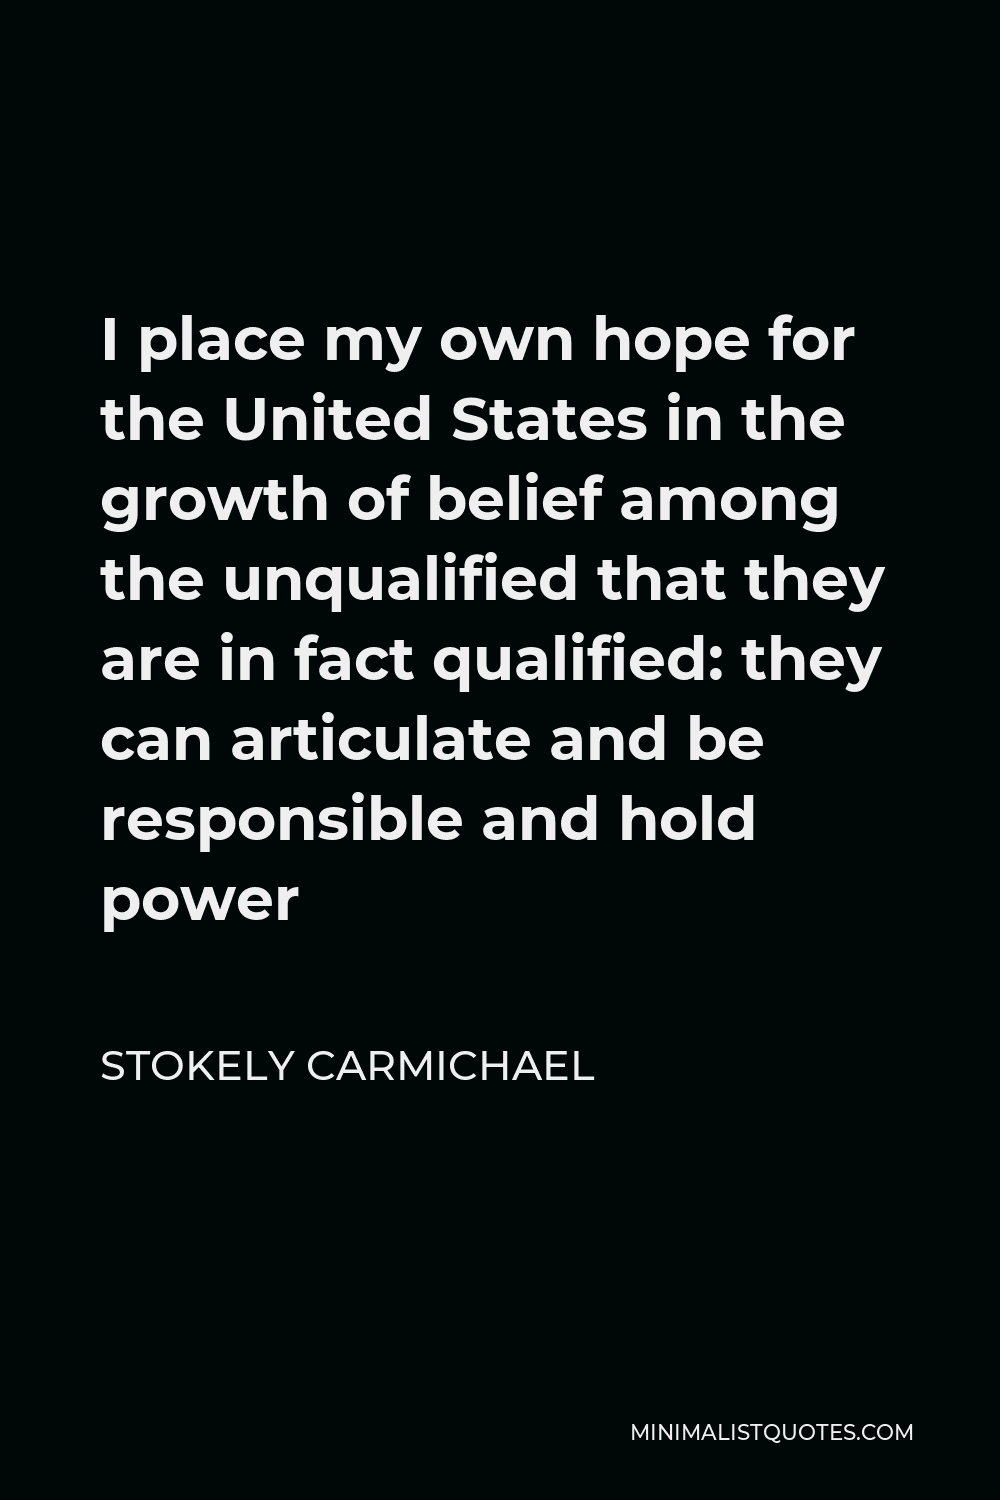 Stokely Carmichael Quote - I place my own hope for the United States in the growth of belief among the unqualified that they are in fact qualified: they can articulate and be responsible and hold power